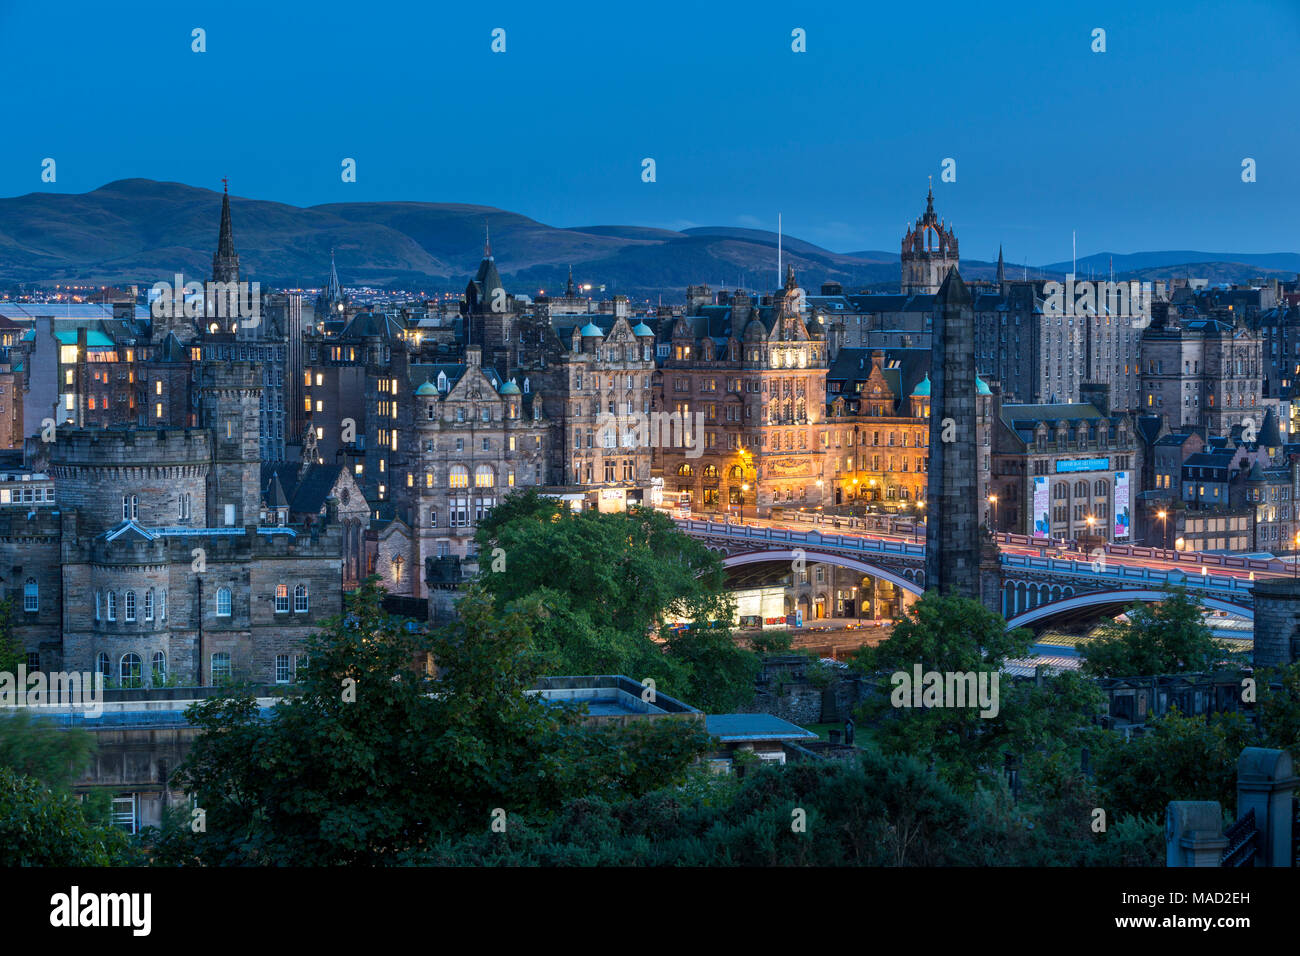 Twilight over Old St Andrew's House and buildings of Edinburgh, Scotland, UK Stock Photo